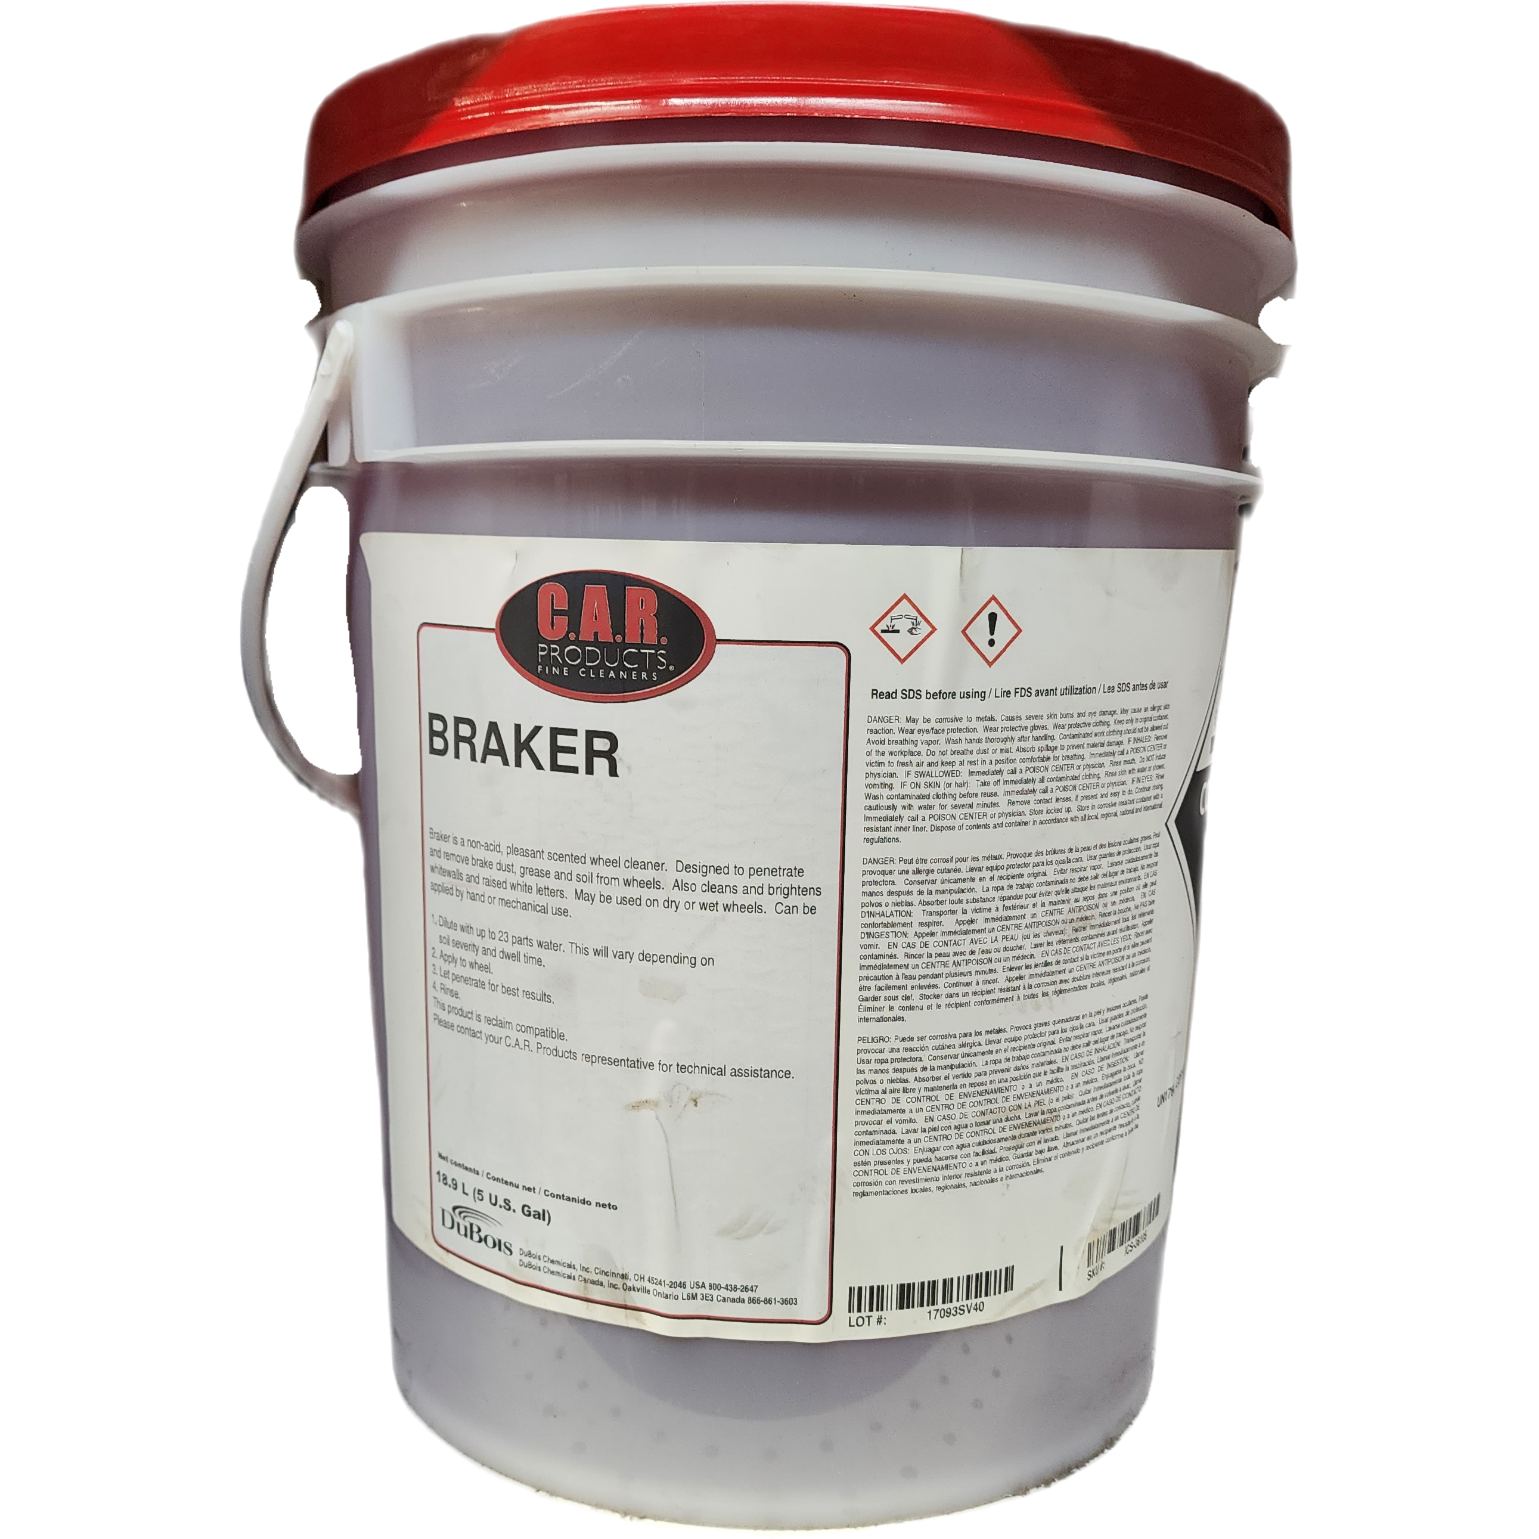 XCP ICS-36105 CAR Products Braker Wheel Cleaner (5 gal)